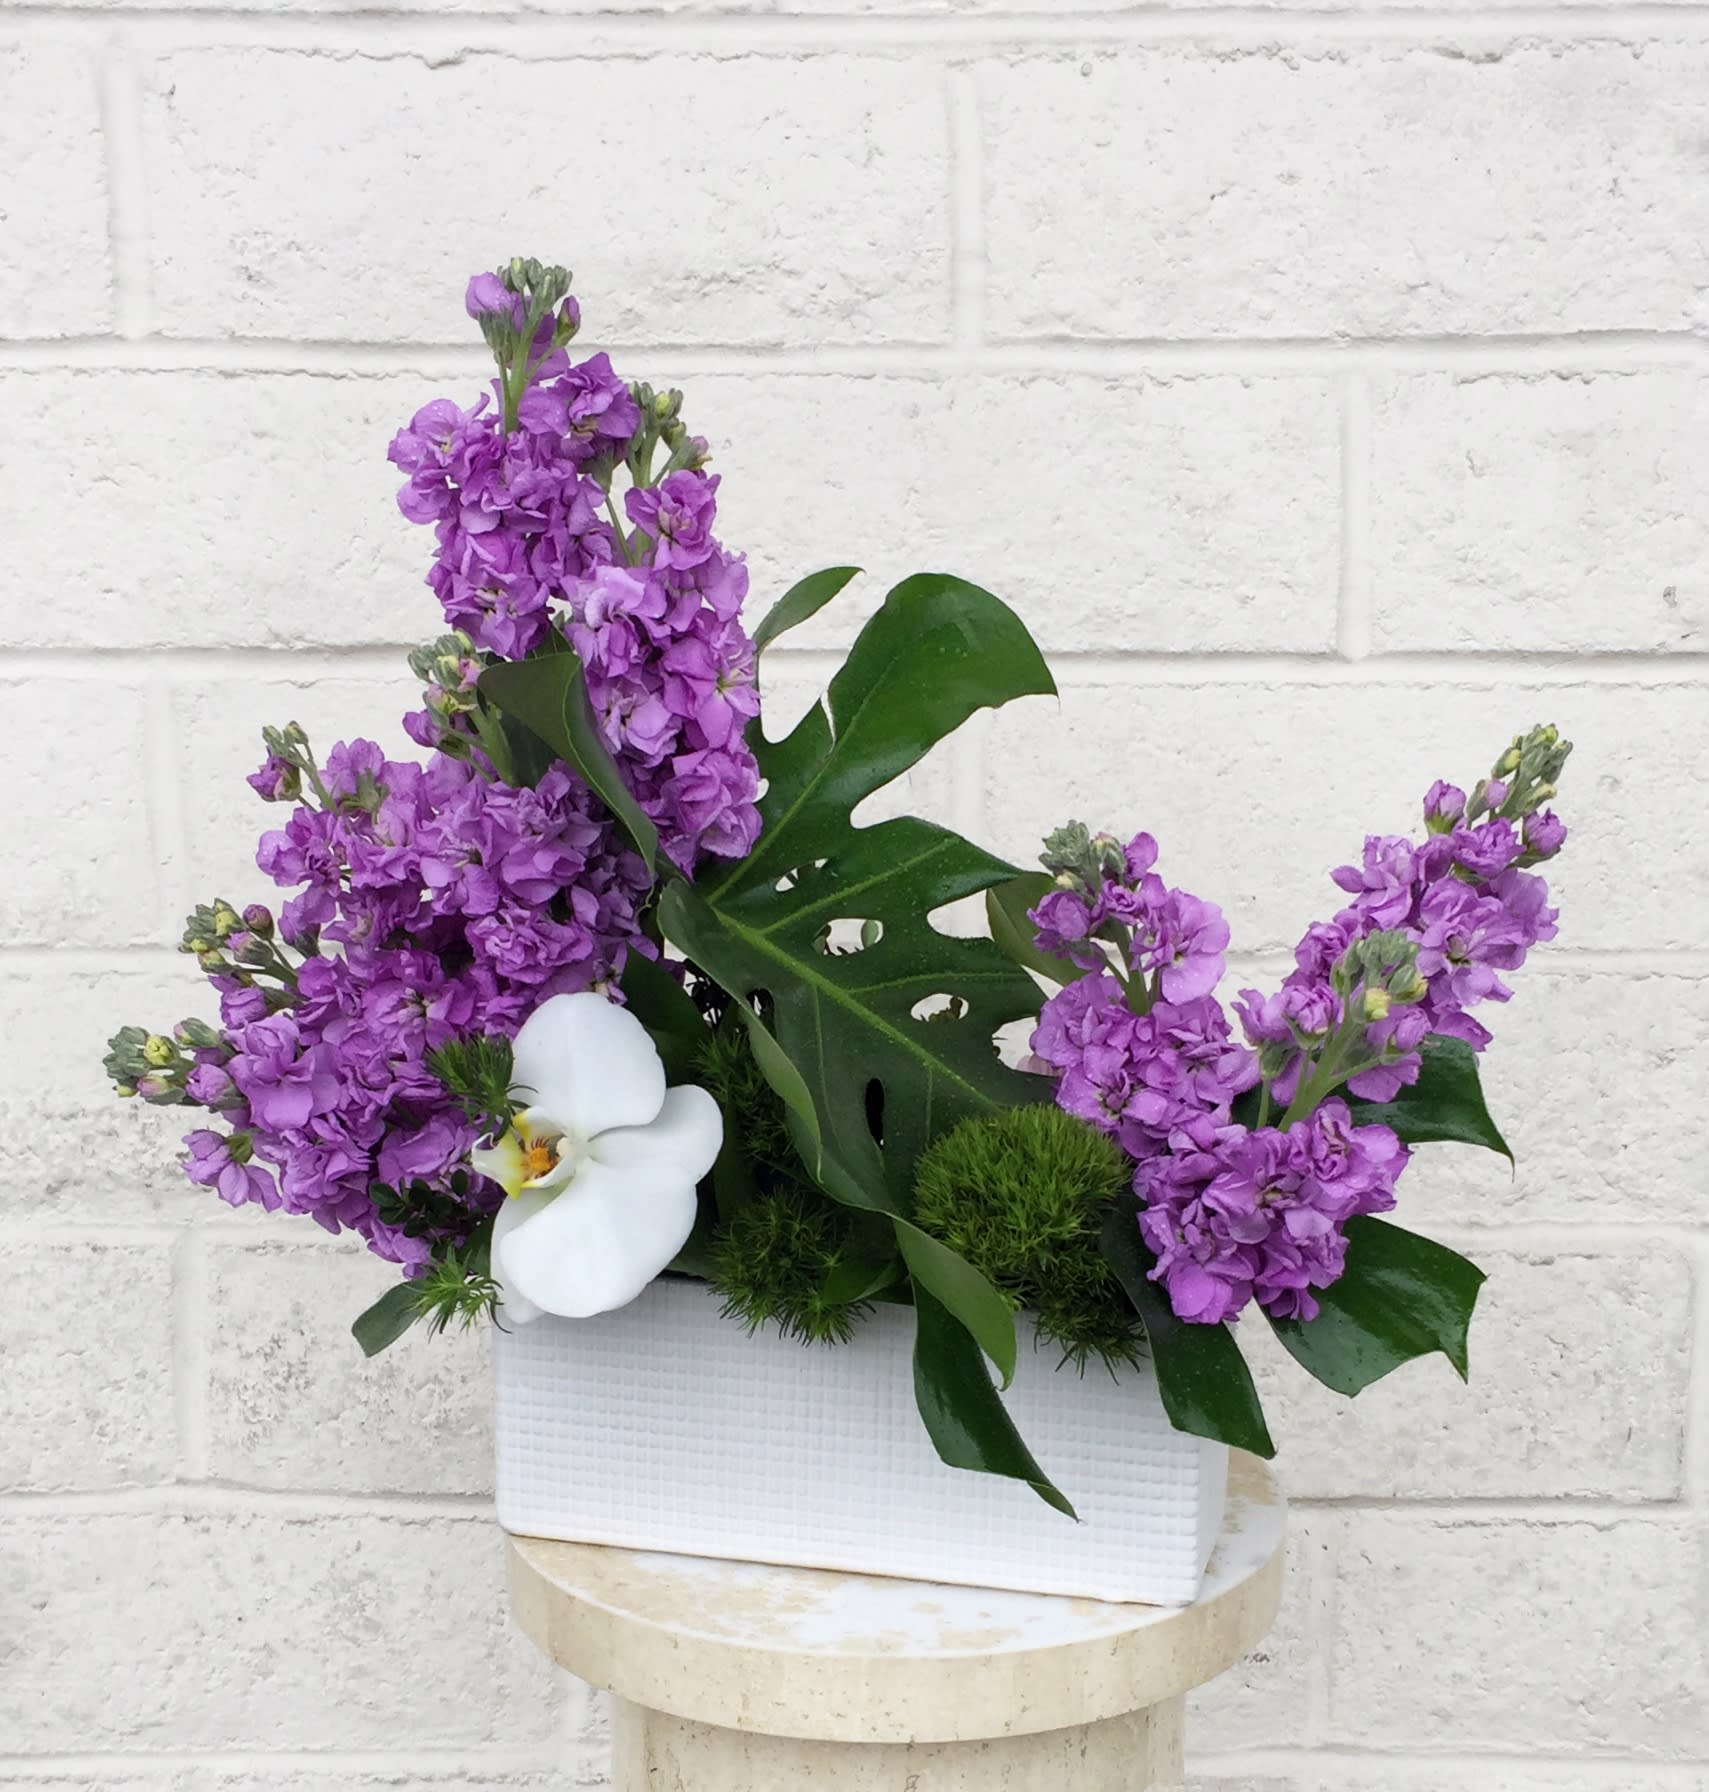 Peaceful Mind - A Zen design including fragrant stock and orchid with accents in a nice container.